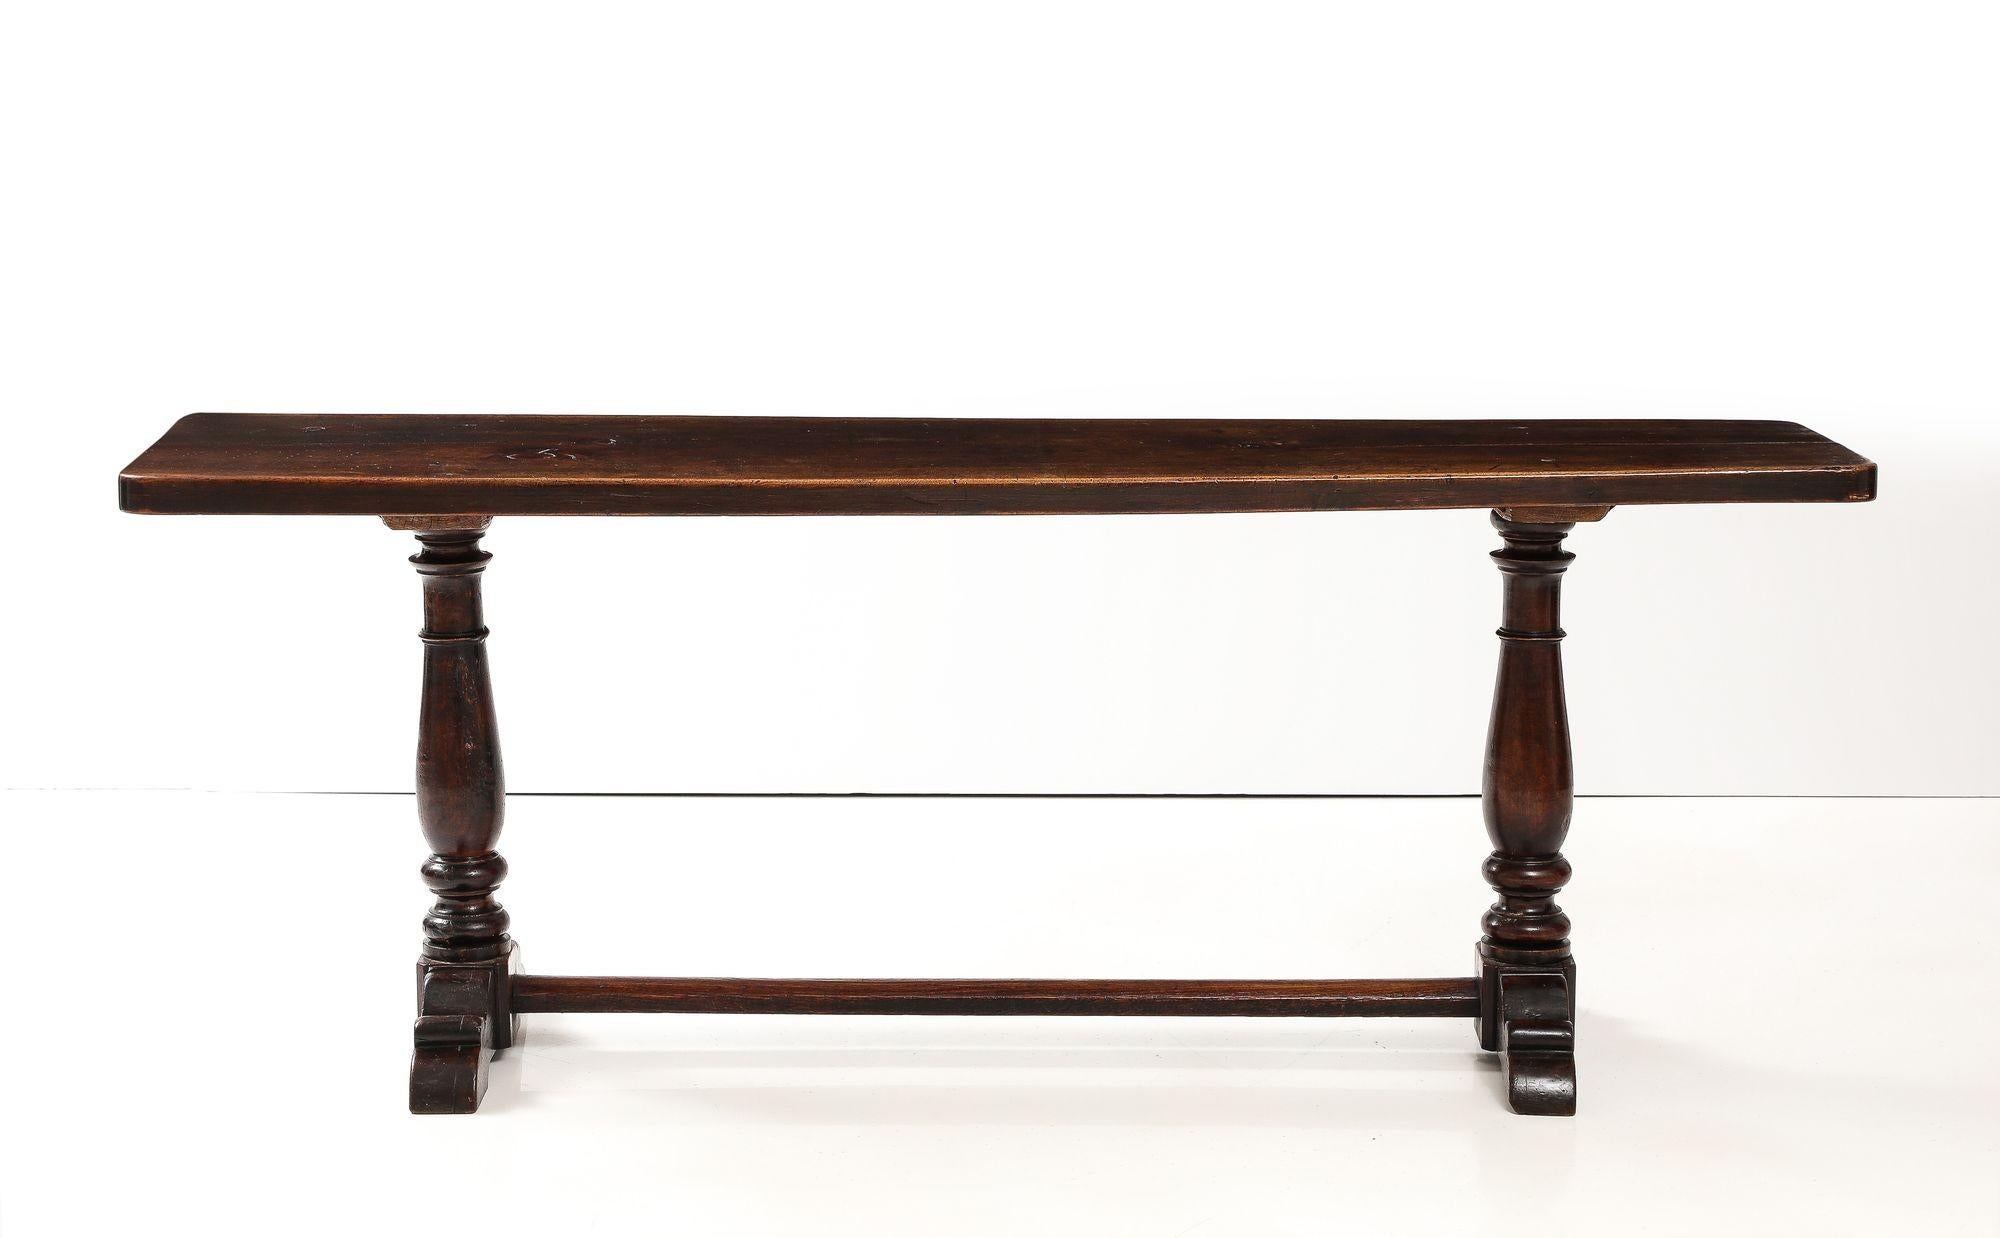 Fine Italian baroque walnut trestle table, the bold top fashioned from a single plank, standing on balustrade-turned trestle ends joined by bar stretcher over sled feet, the whole with good rich nutty color and even patination.